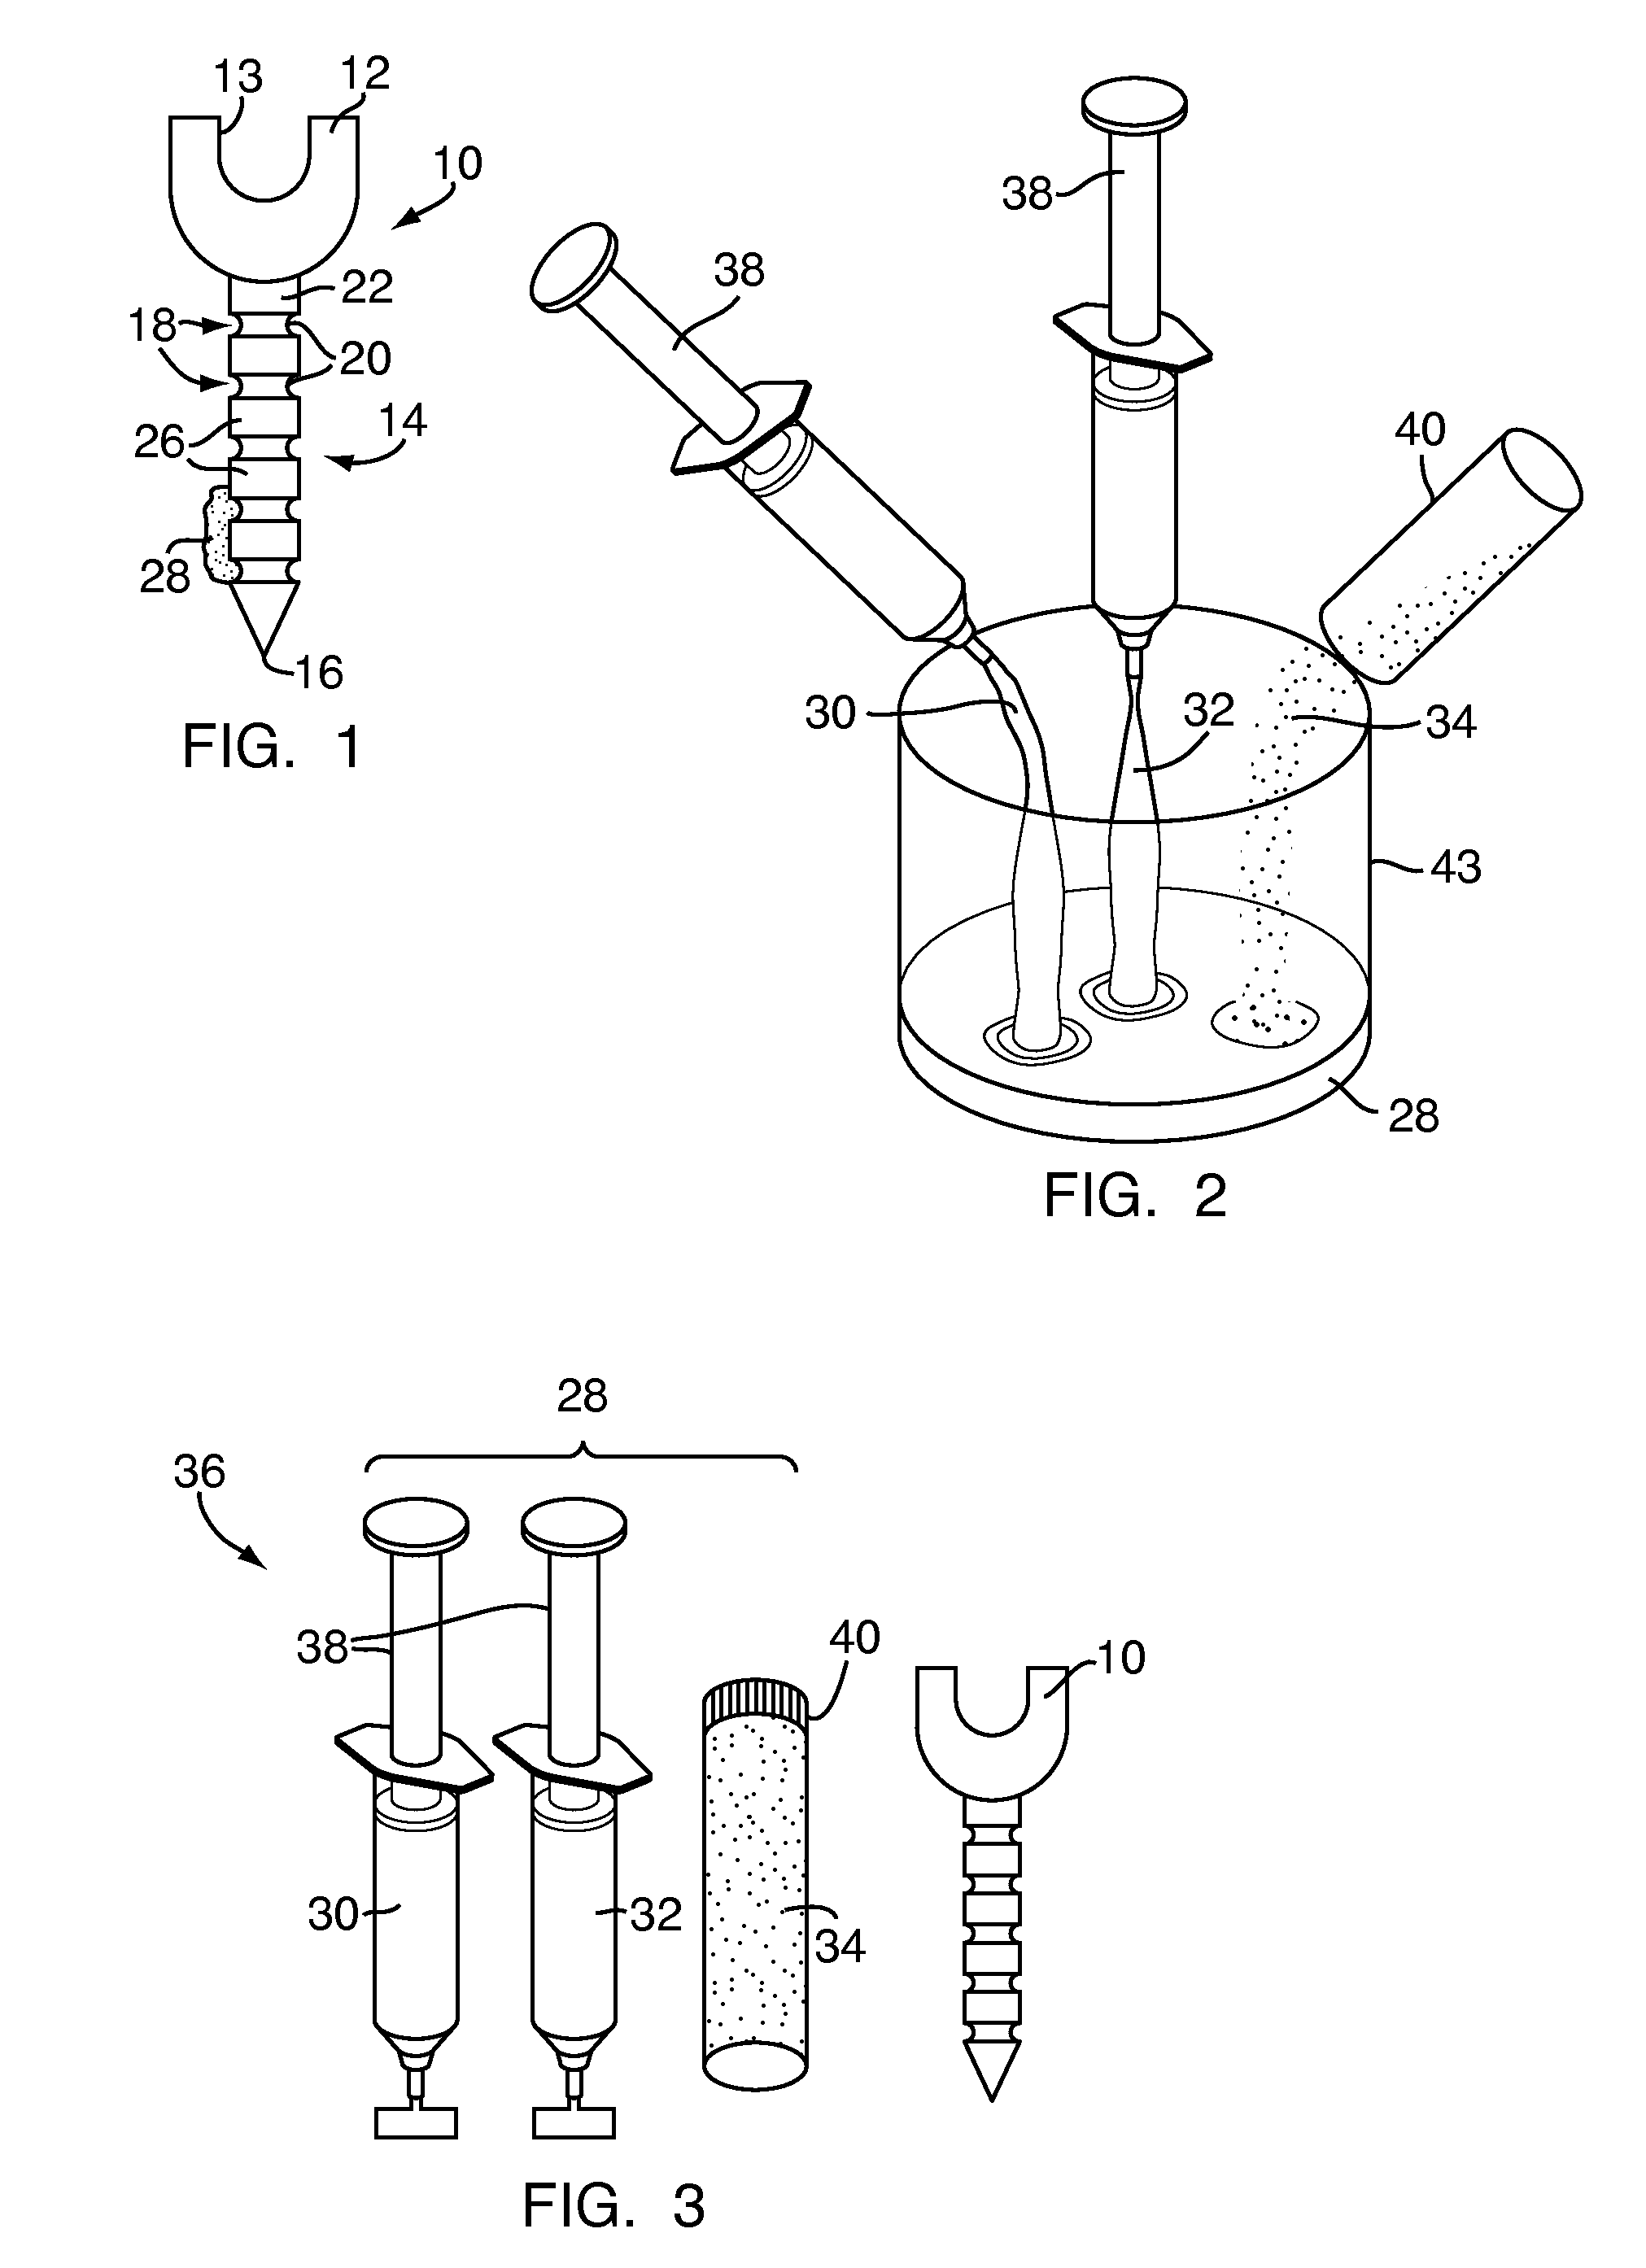 Methods and devices for spinal fusion